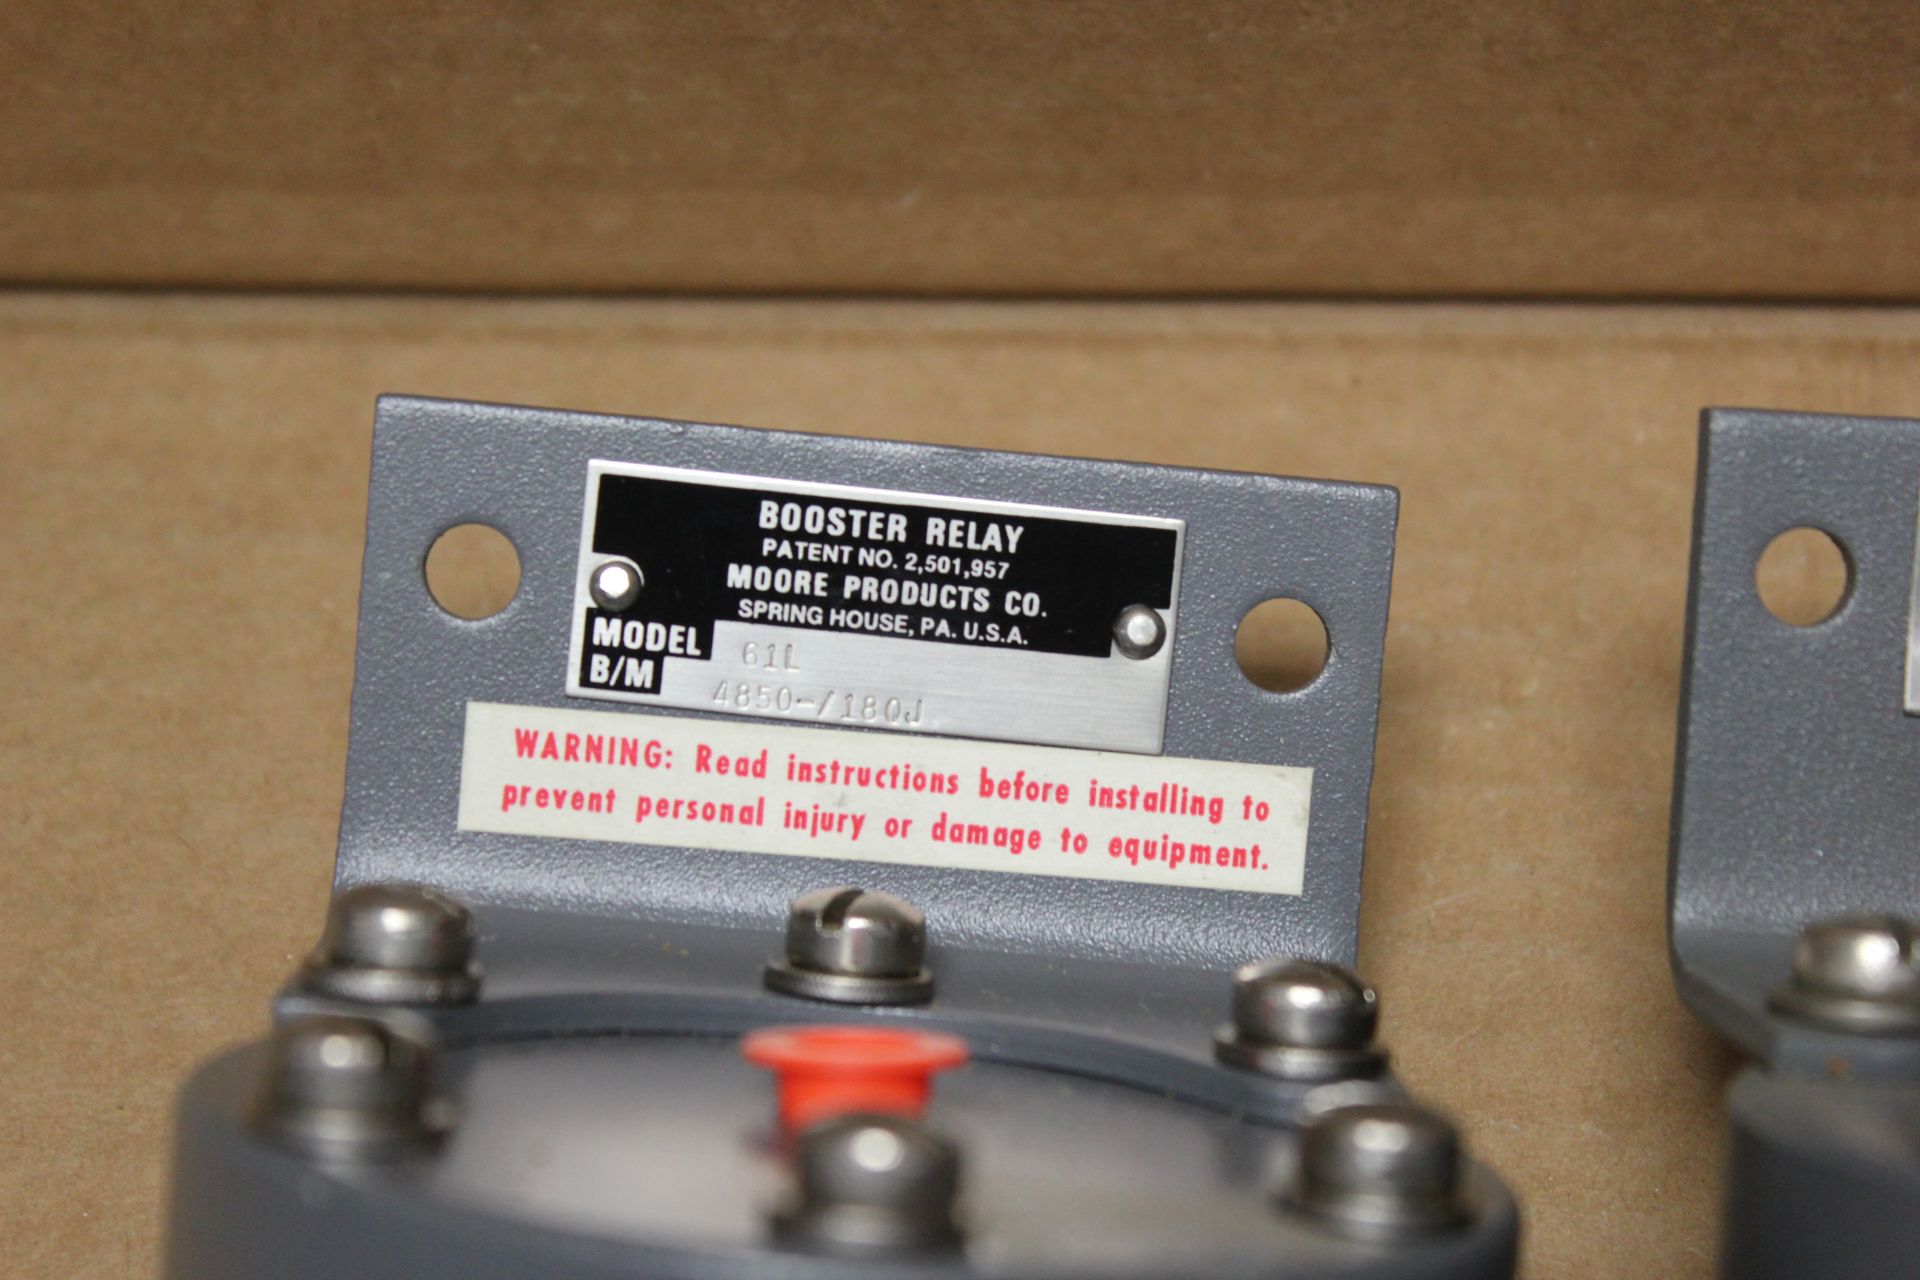 LOT OF 2 NEW MOORE PRODUCTS BOOSTER RELAYS - Image 2 of 2